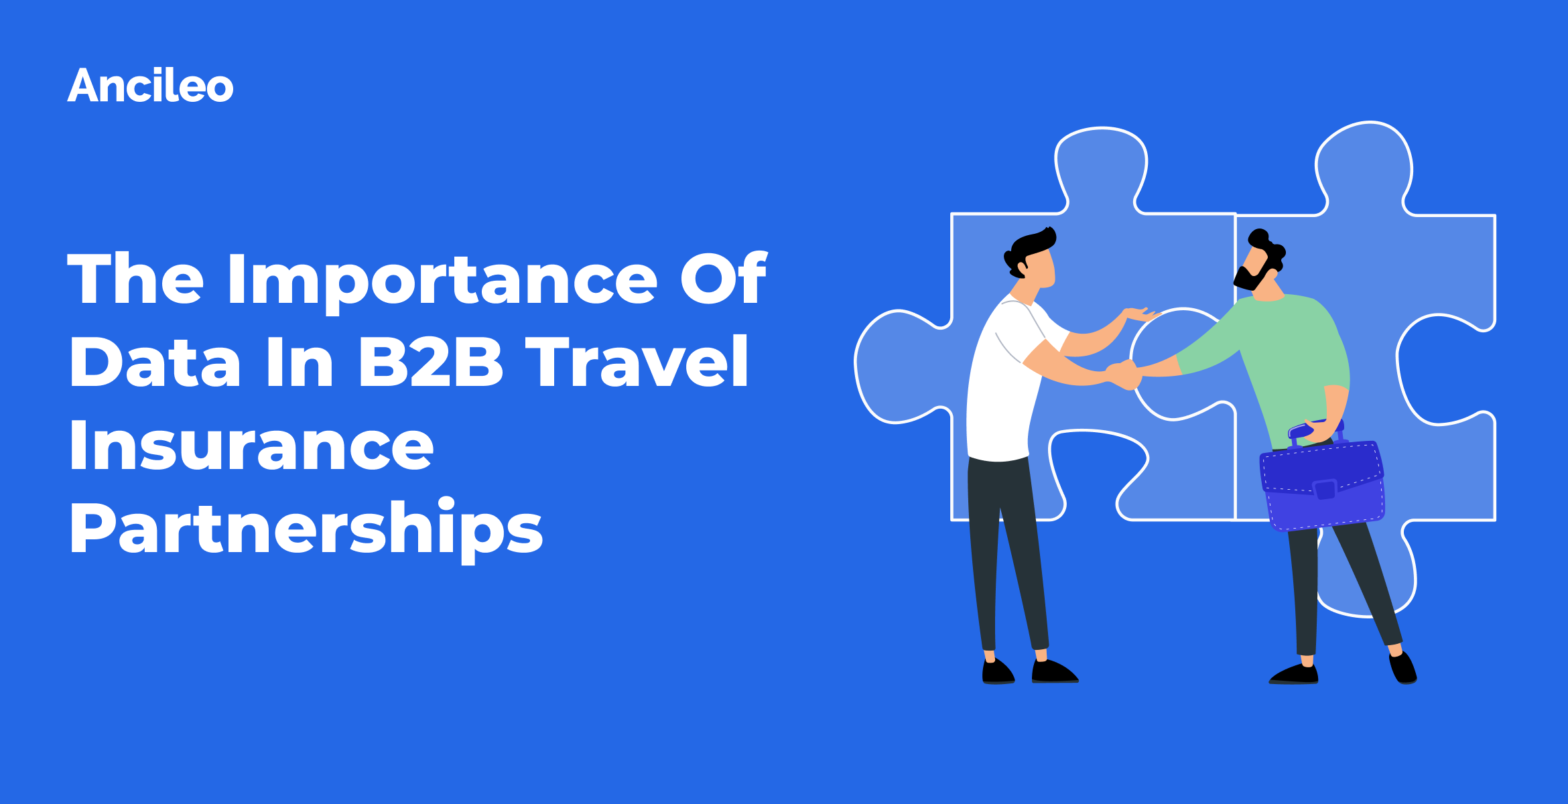 The Importance Of Data In B2B Travel Insurance Partnerships